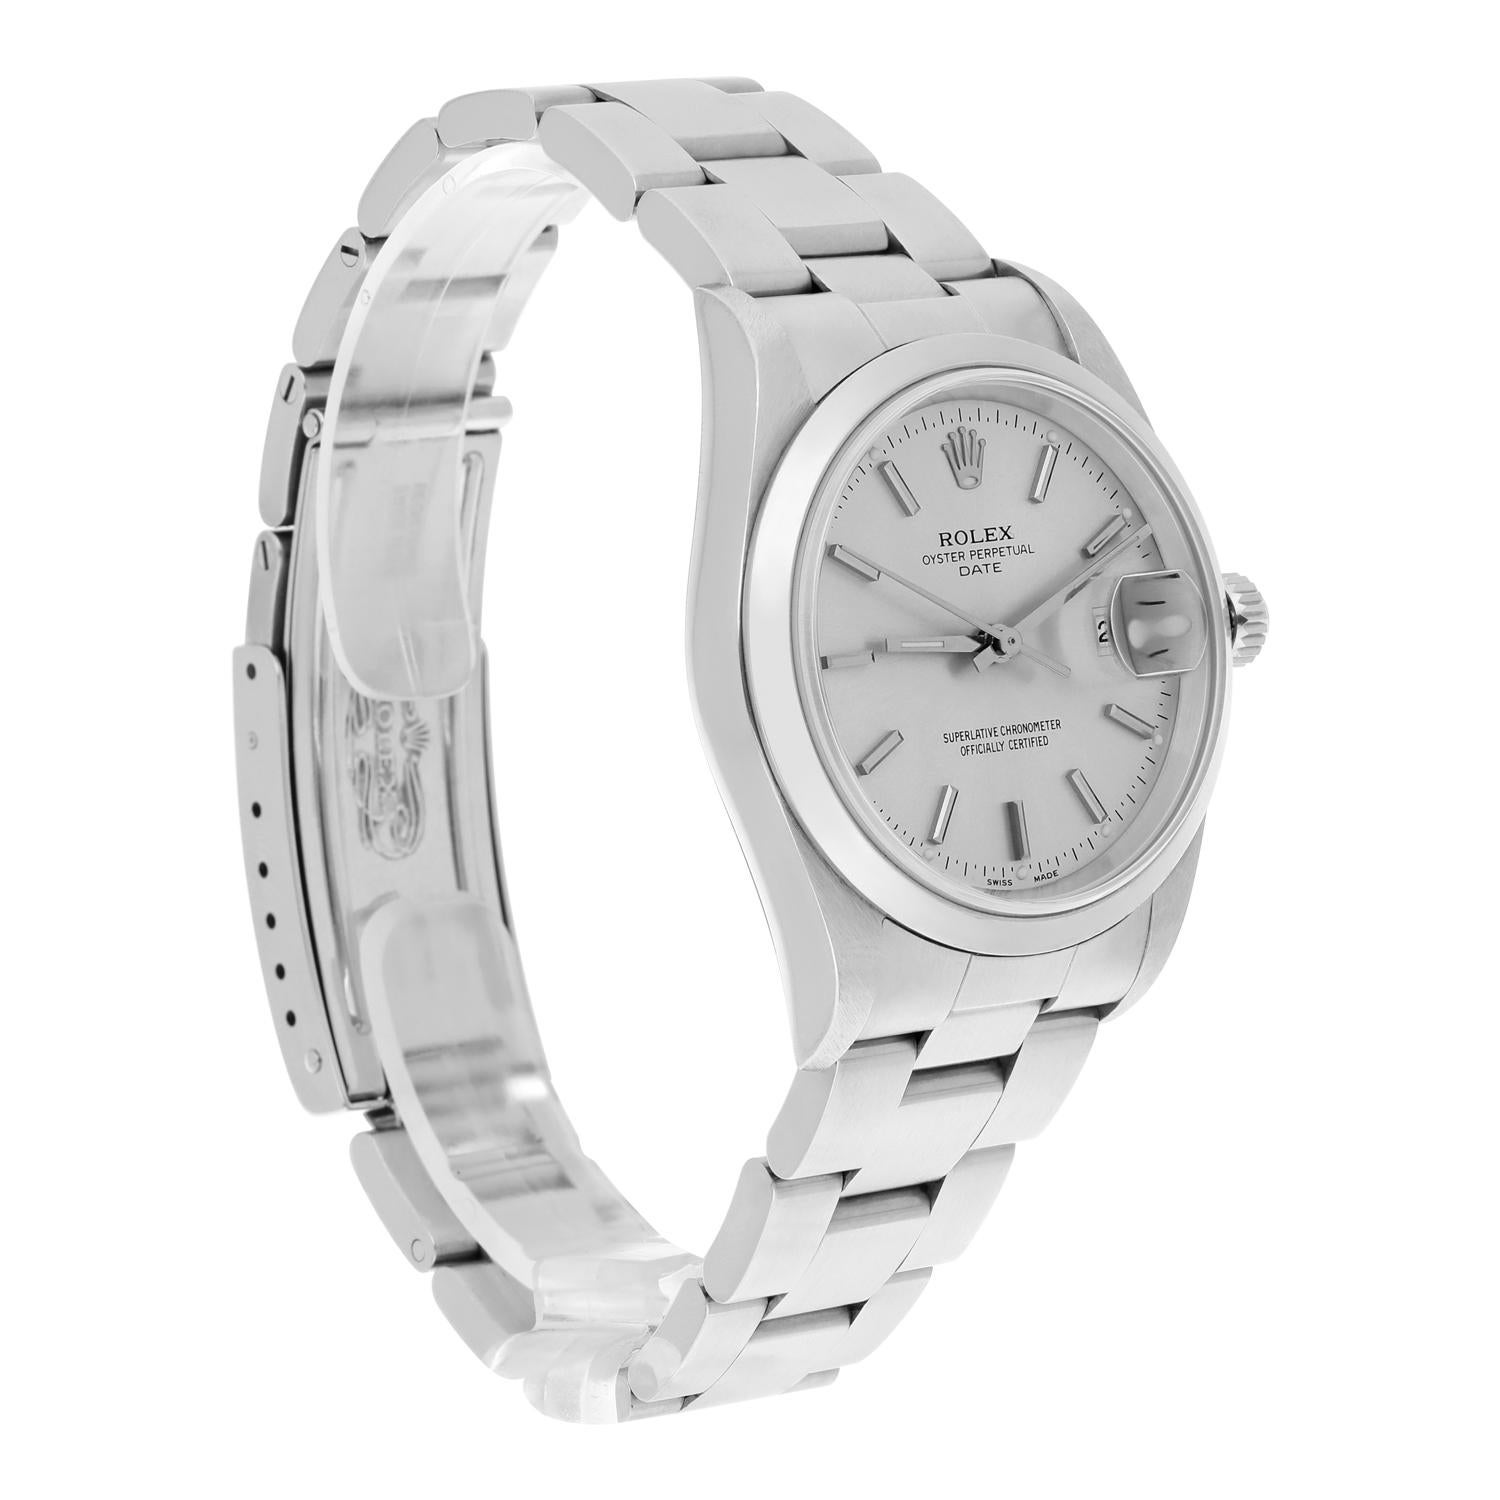 Modern Rolex Date 34mm Stainless Steel Watch Oyster Band Silver Dial Circa 2001 15200 For Sale